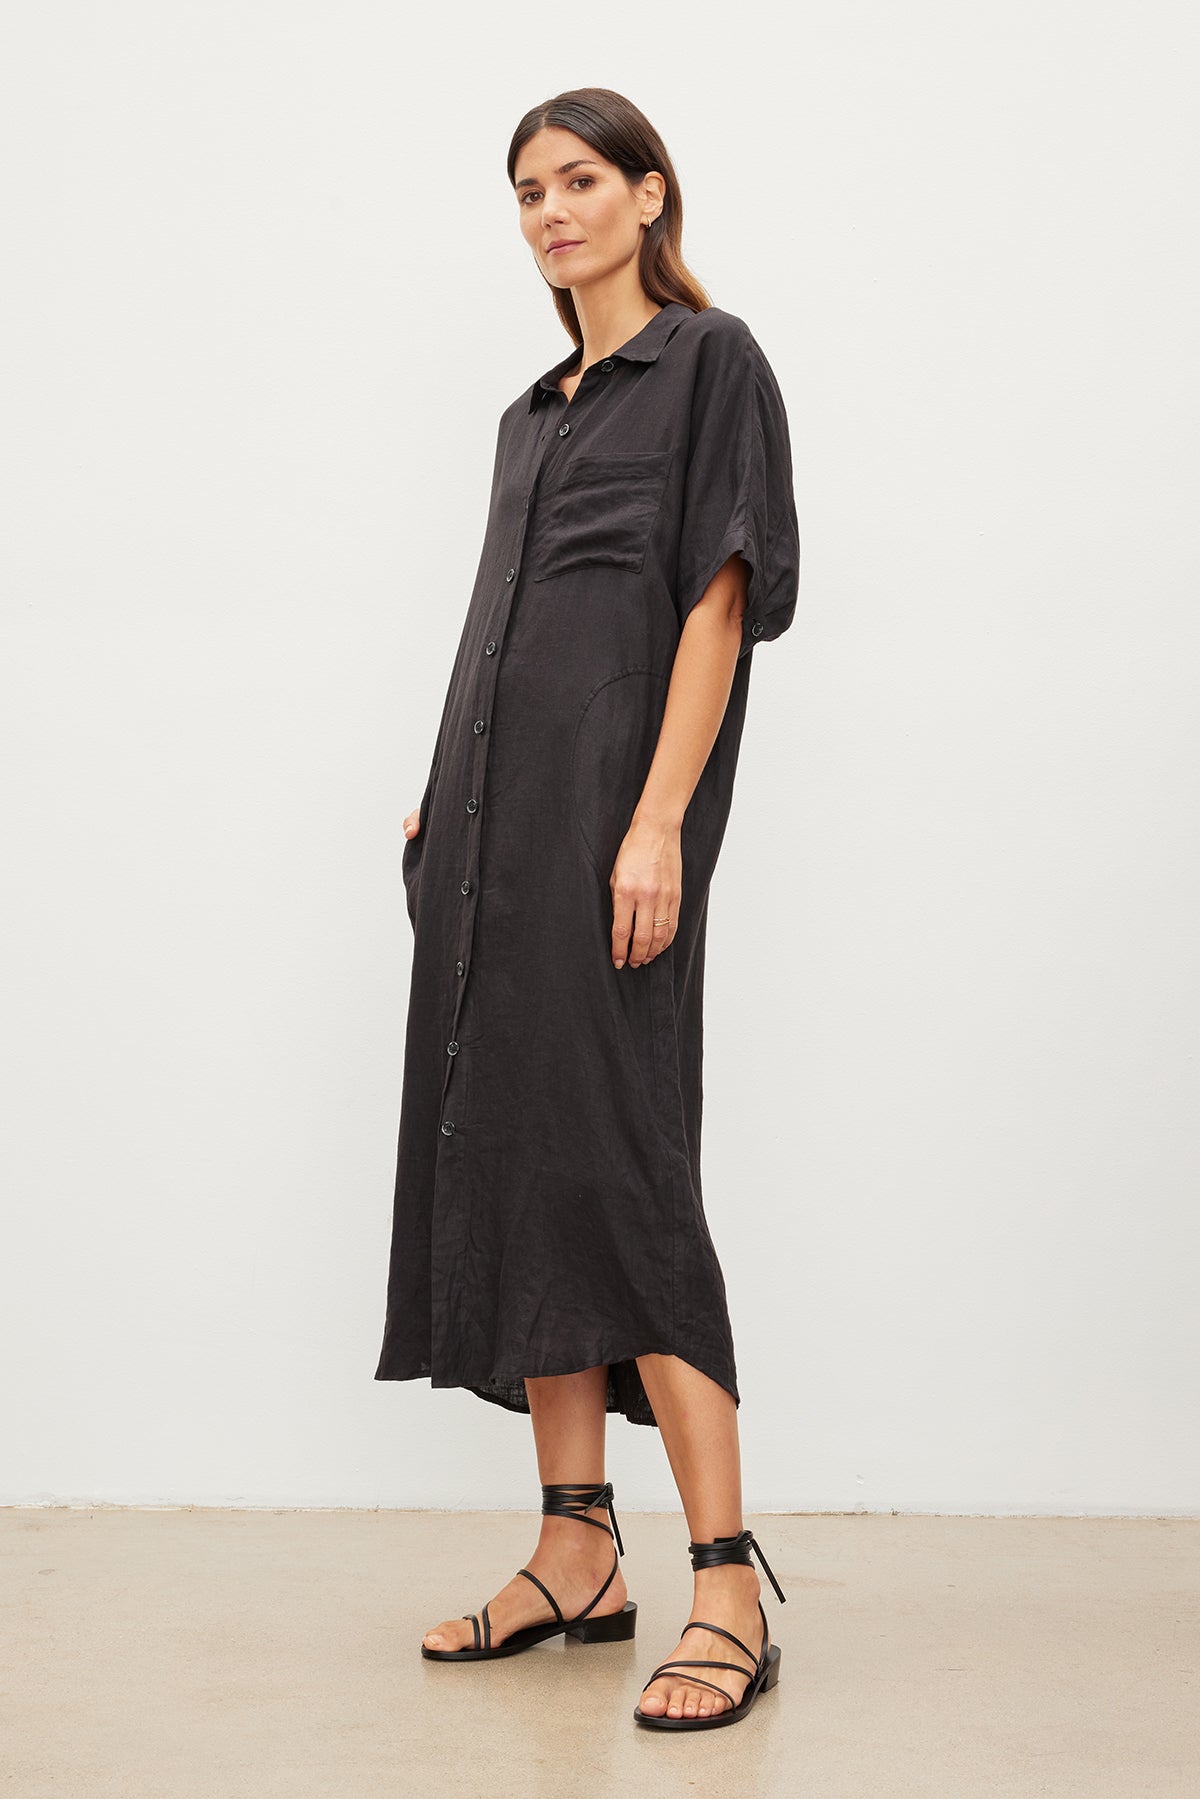 A woman stands in a plain room, wearing a black Sandra Linen button-up dress with short sleeves and strappy black sandals by Velvet by Graham & Spencer.-35967717605569